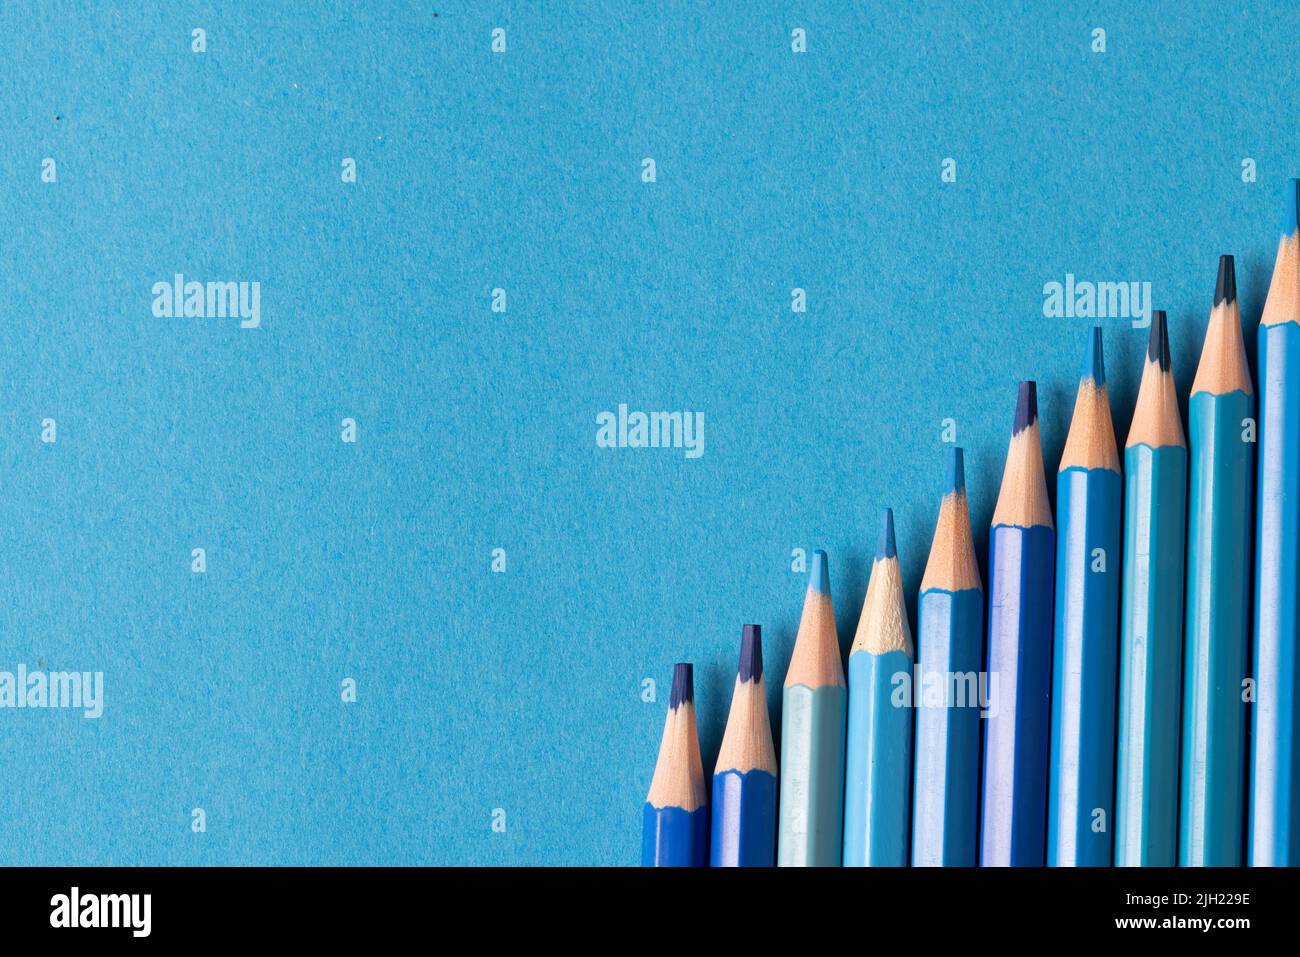 Image of row of different shades of blue crayons on blue background Stock Photo